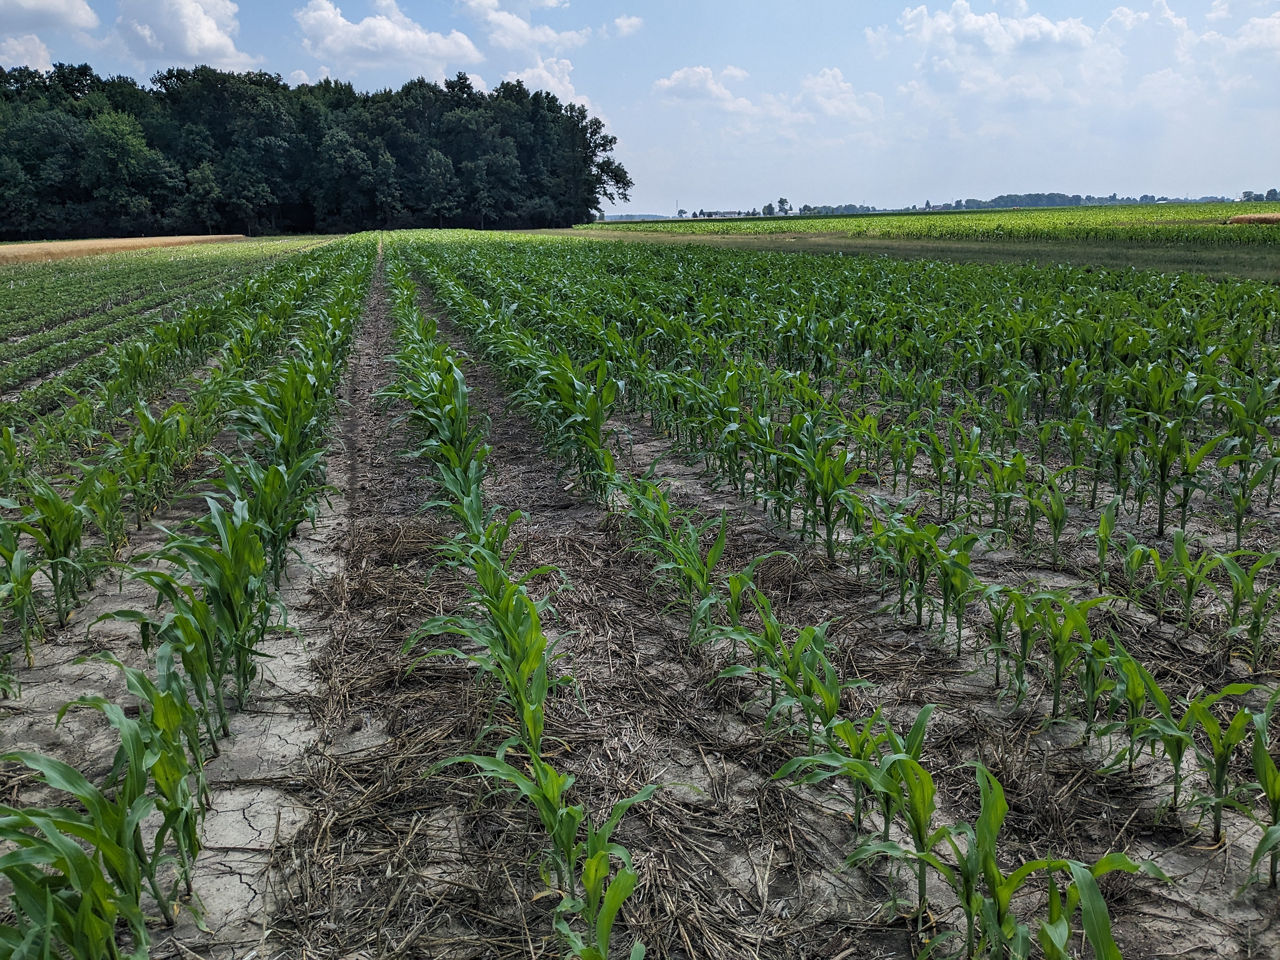 In this field in Ohio, moisture consumed by the cover crop early in the spring likely impacted early growth, as shown by the stunted plants in the foreground, compared to no cover crop in the background. 